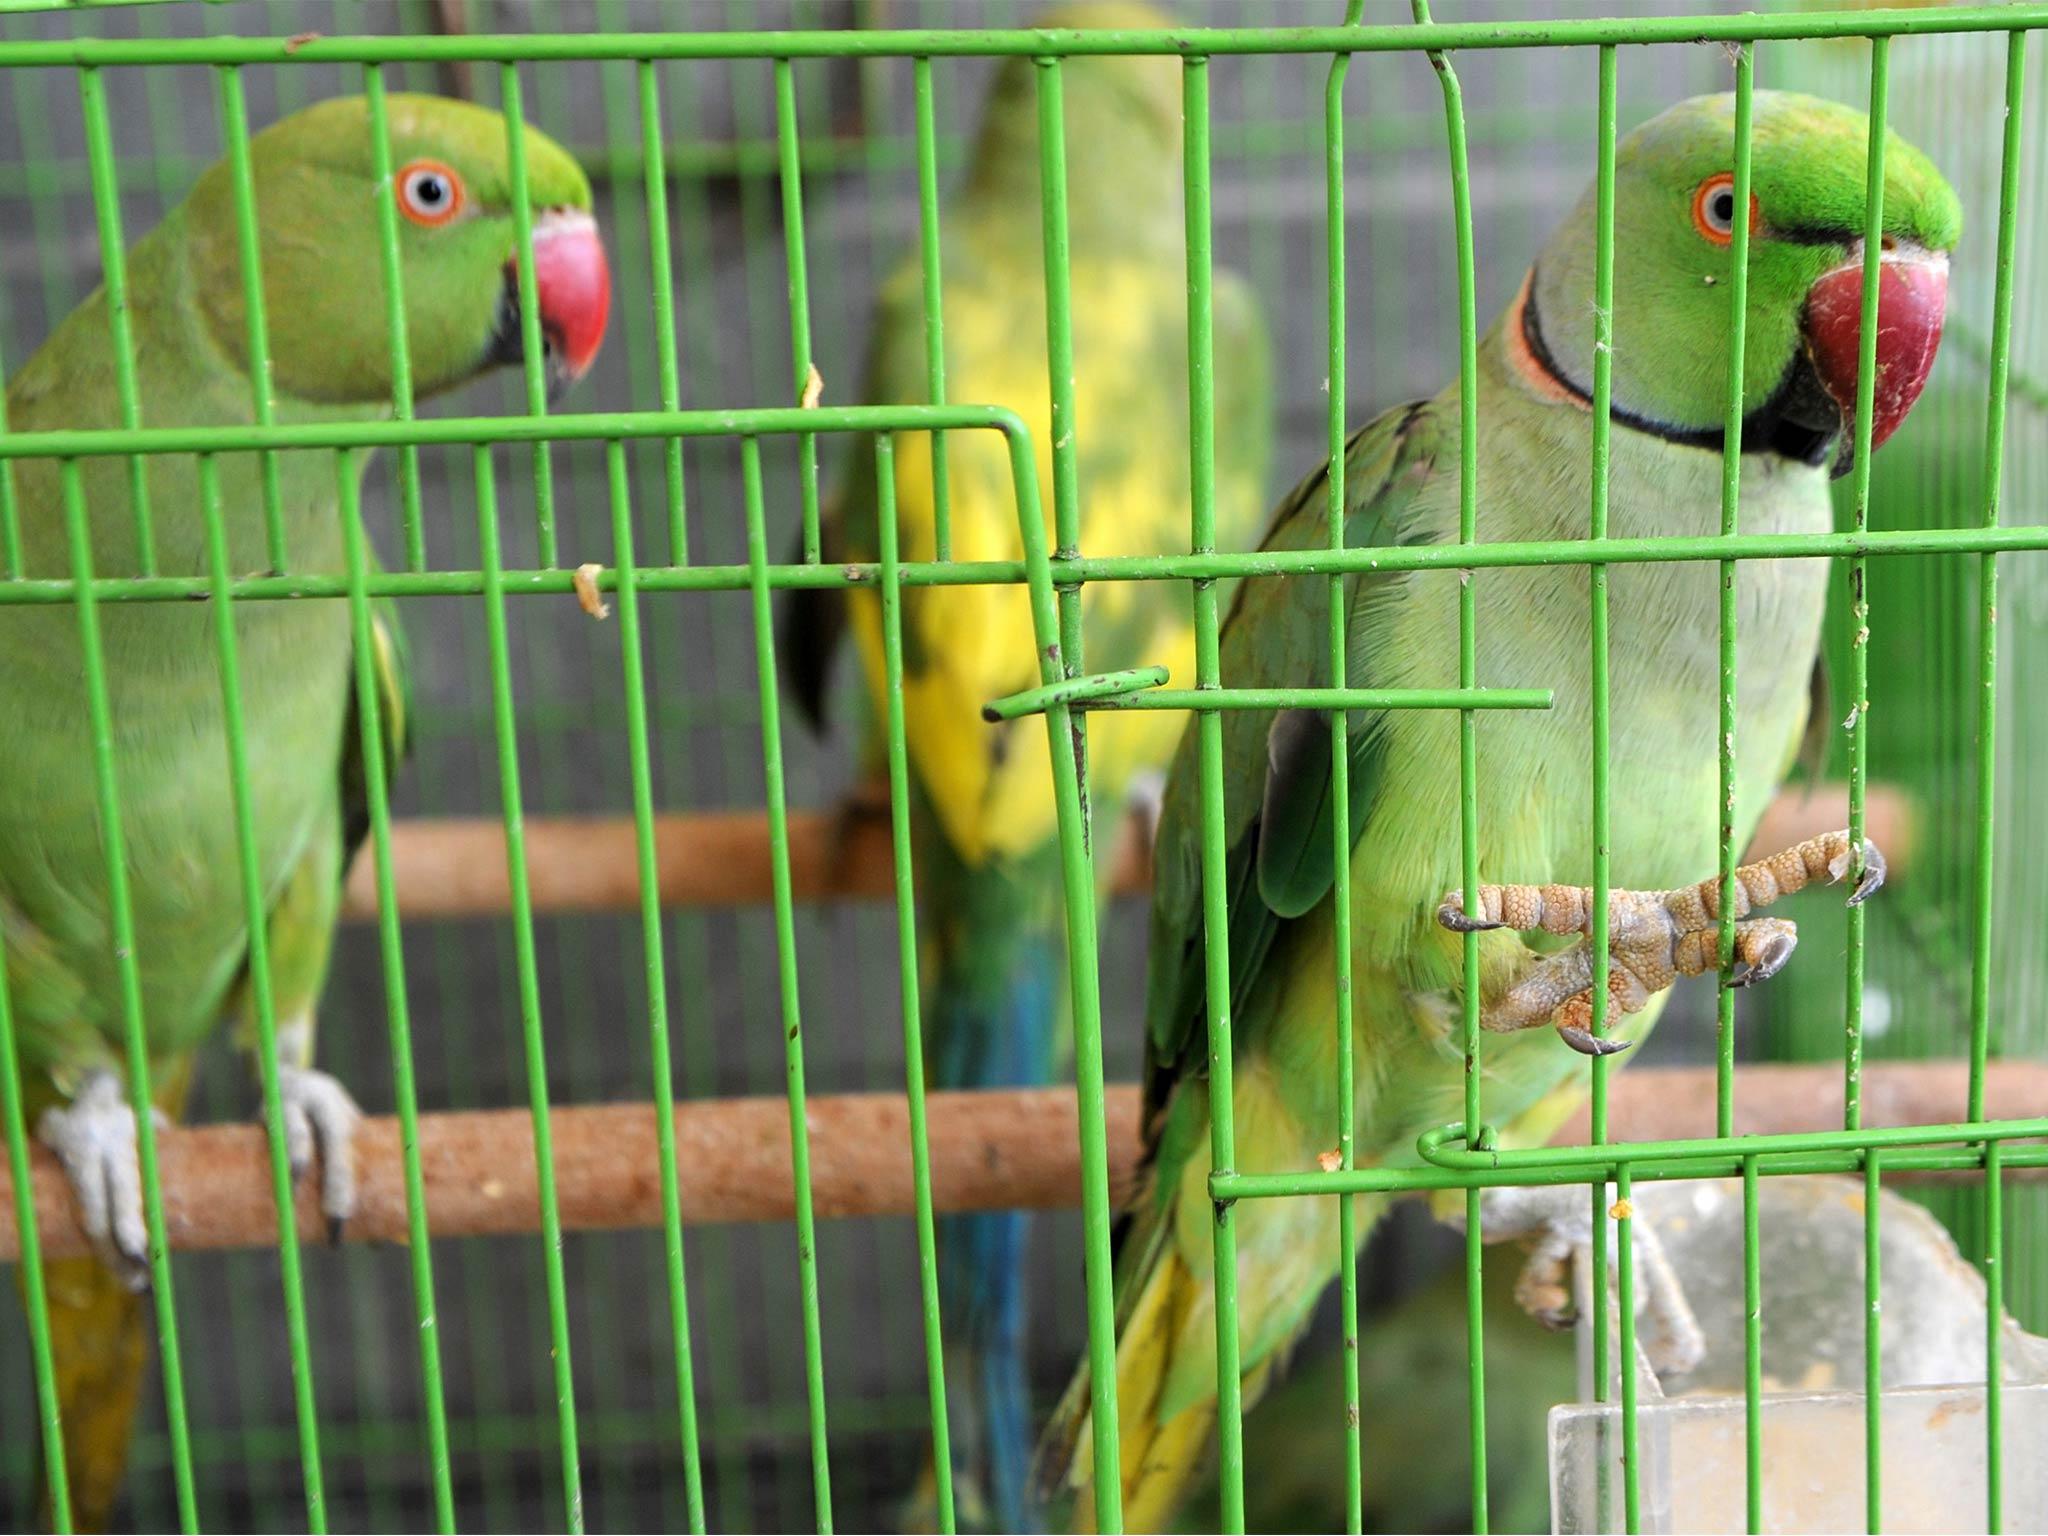 Parakeets now have establised wild populations in the UK after first being imported as pets